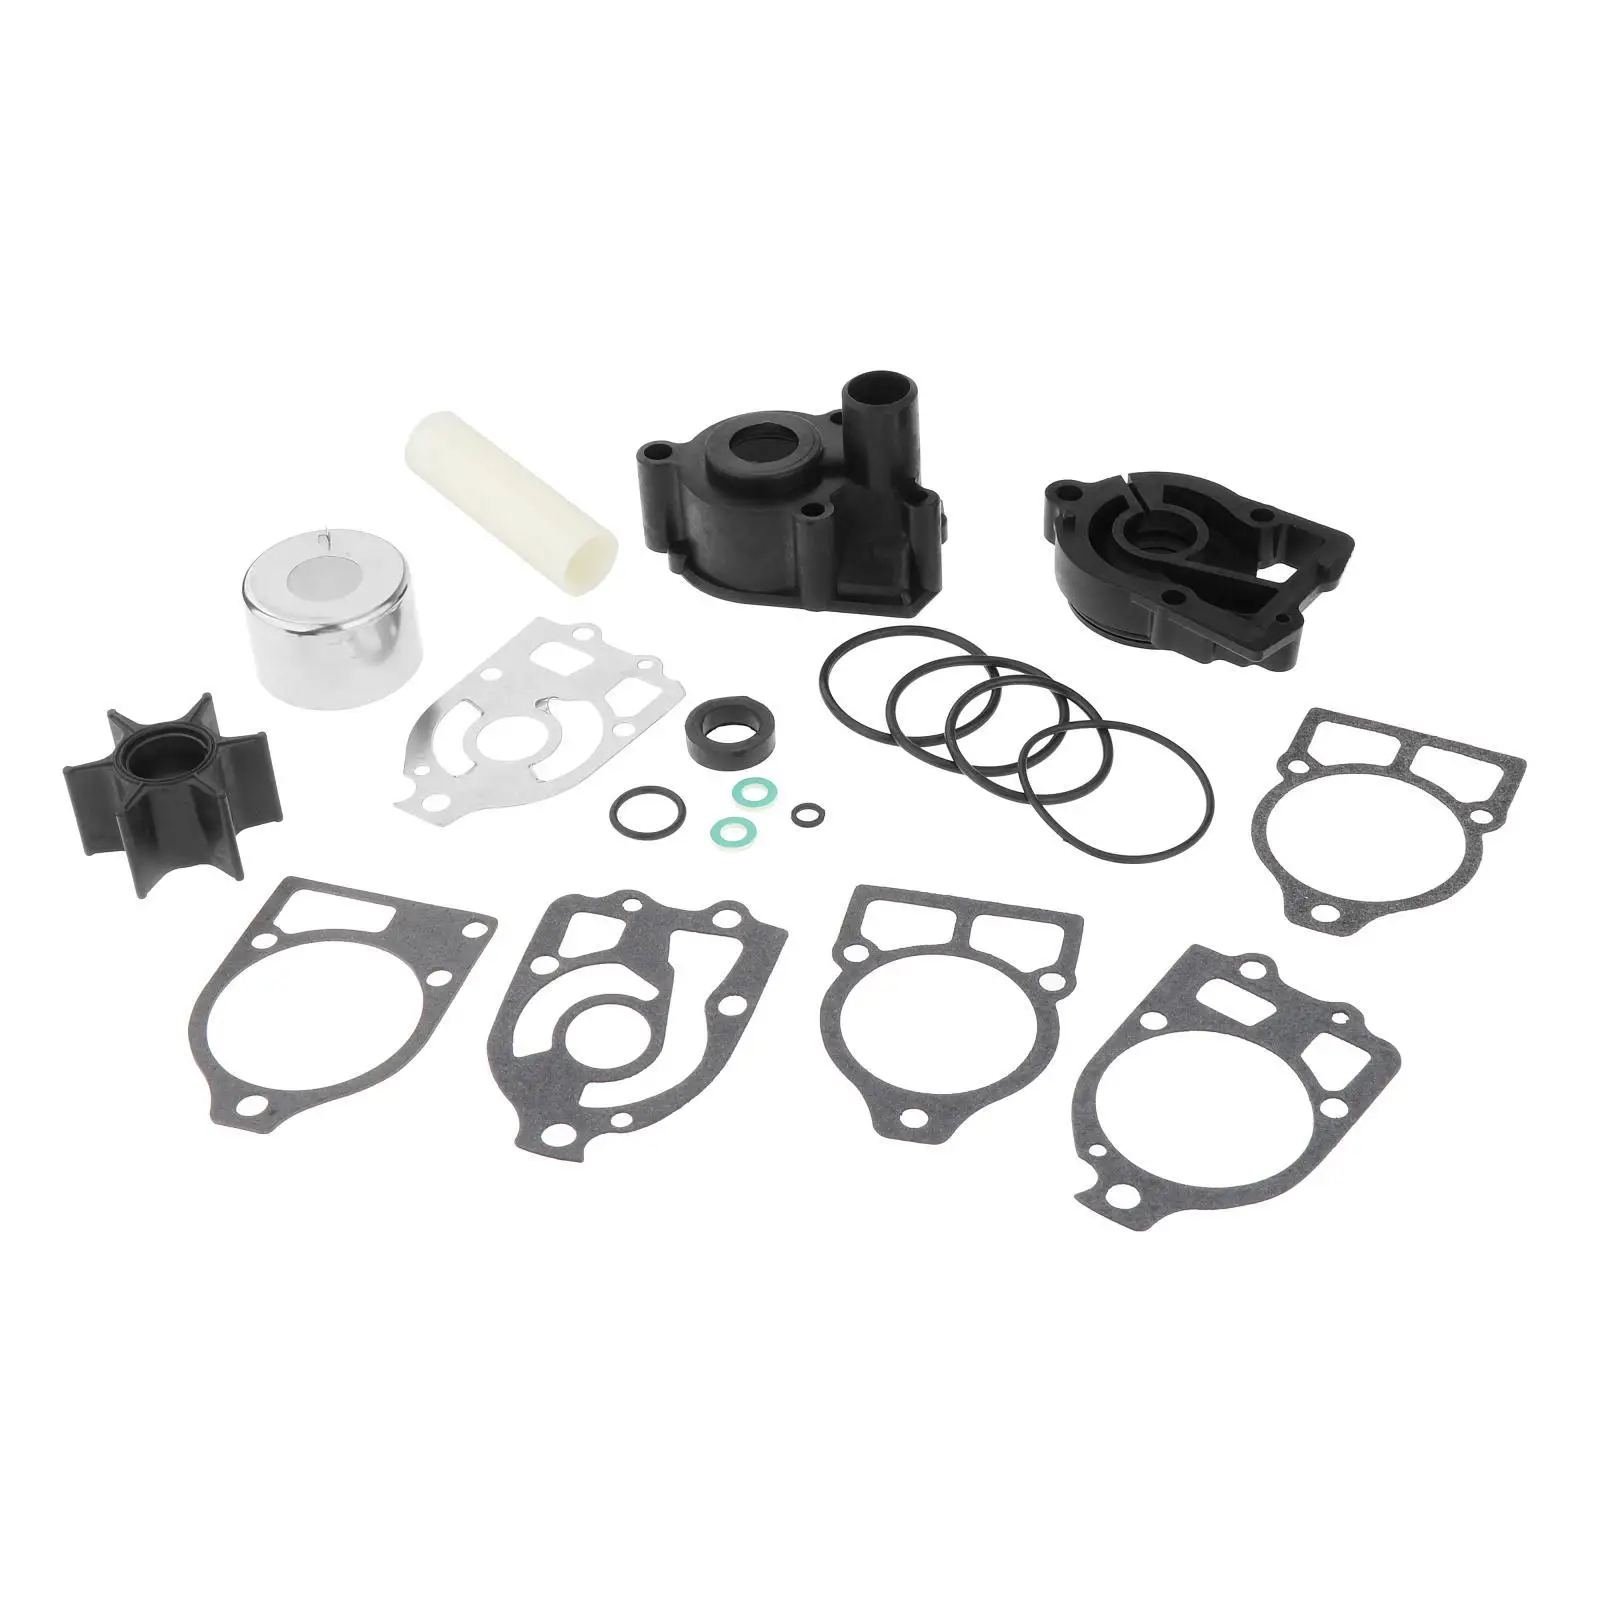 Water Pump Repair Kit with Housing Fit for Mercury Replace Accessories Parts Easy to Install